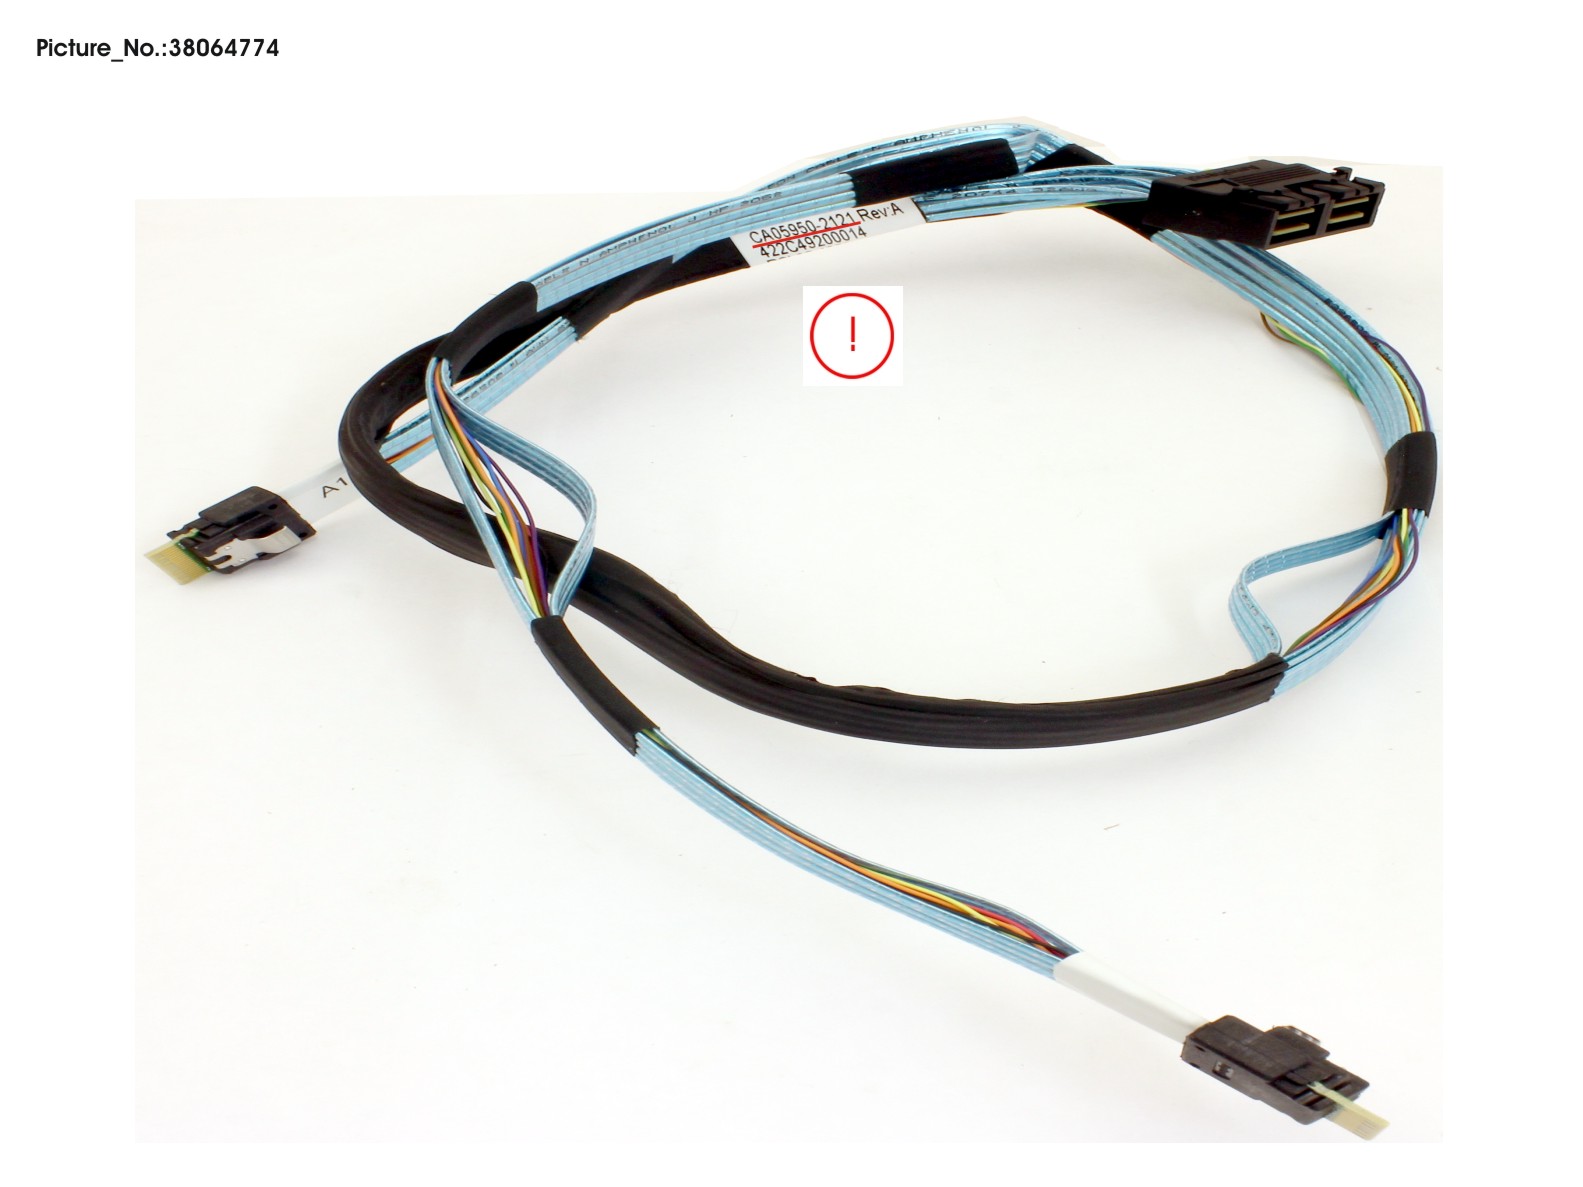 DATA 8X(2.5/3.5) SATA ONBOARD CABLE